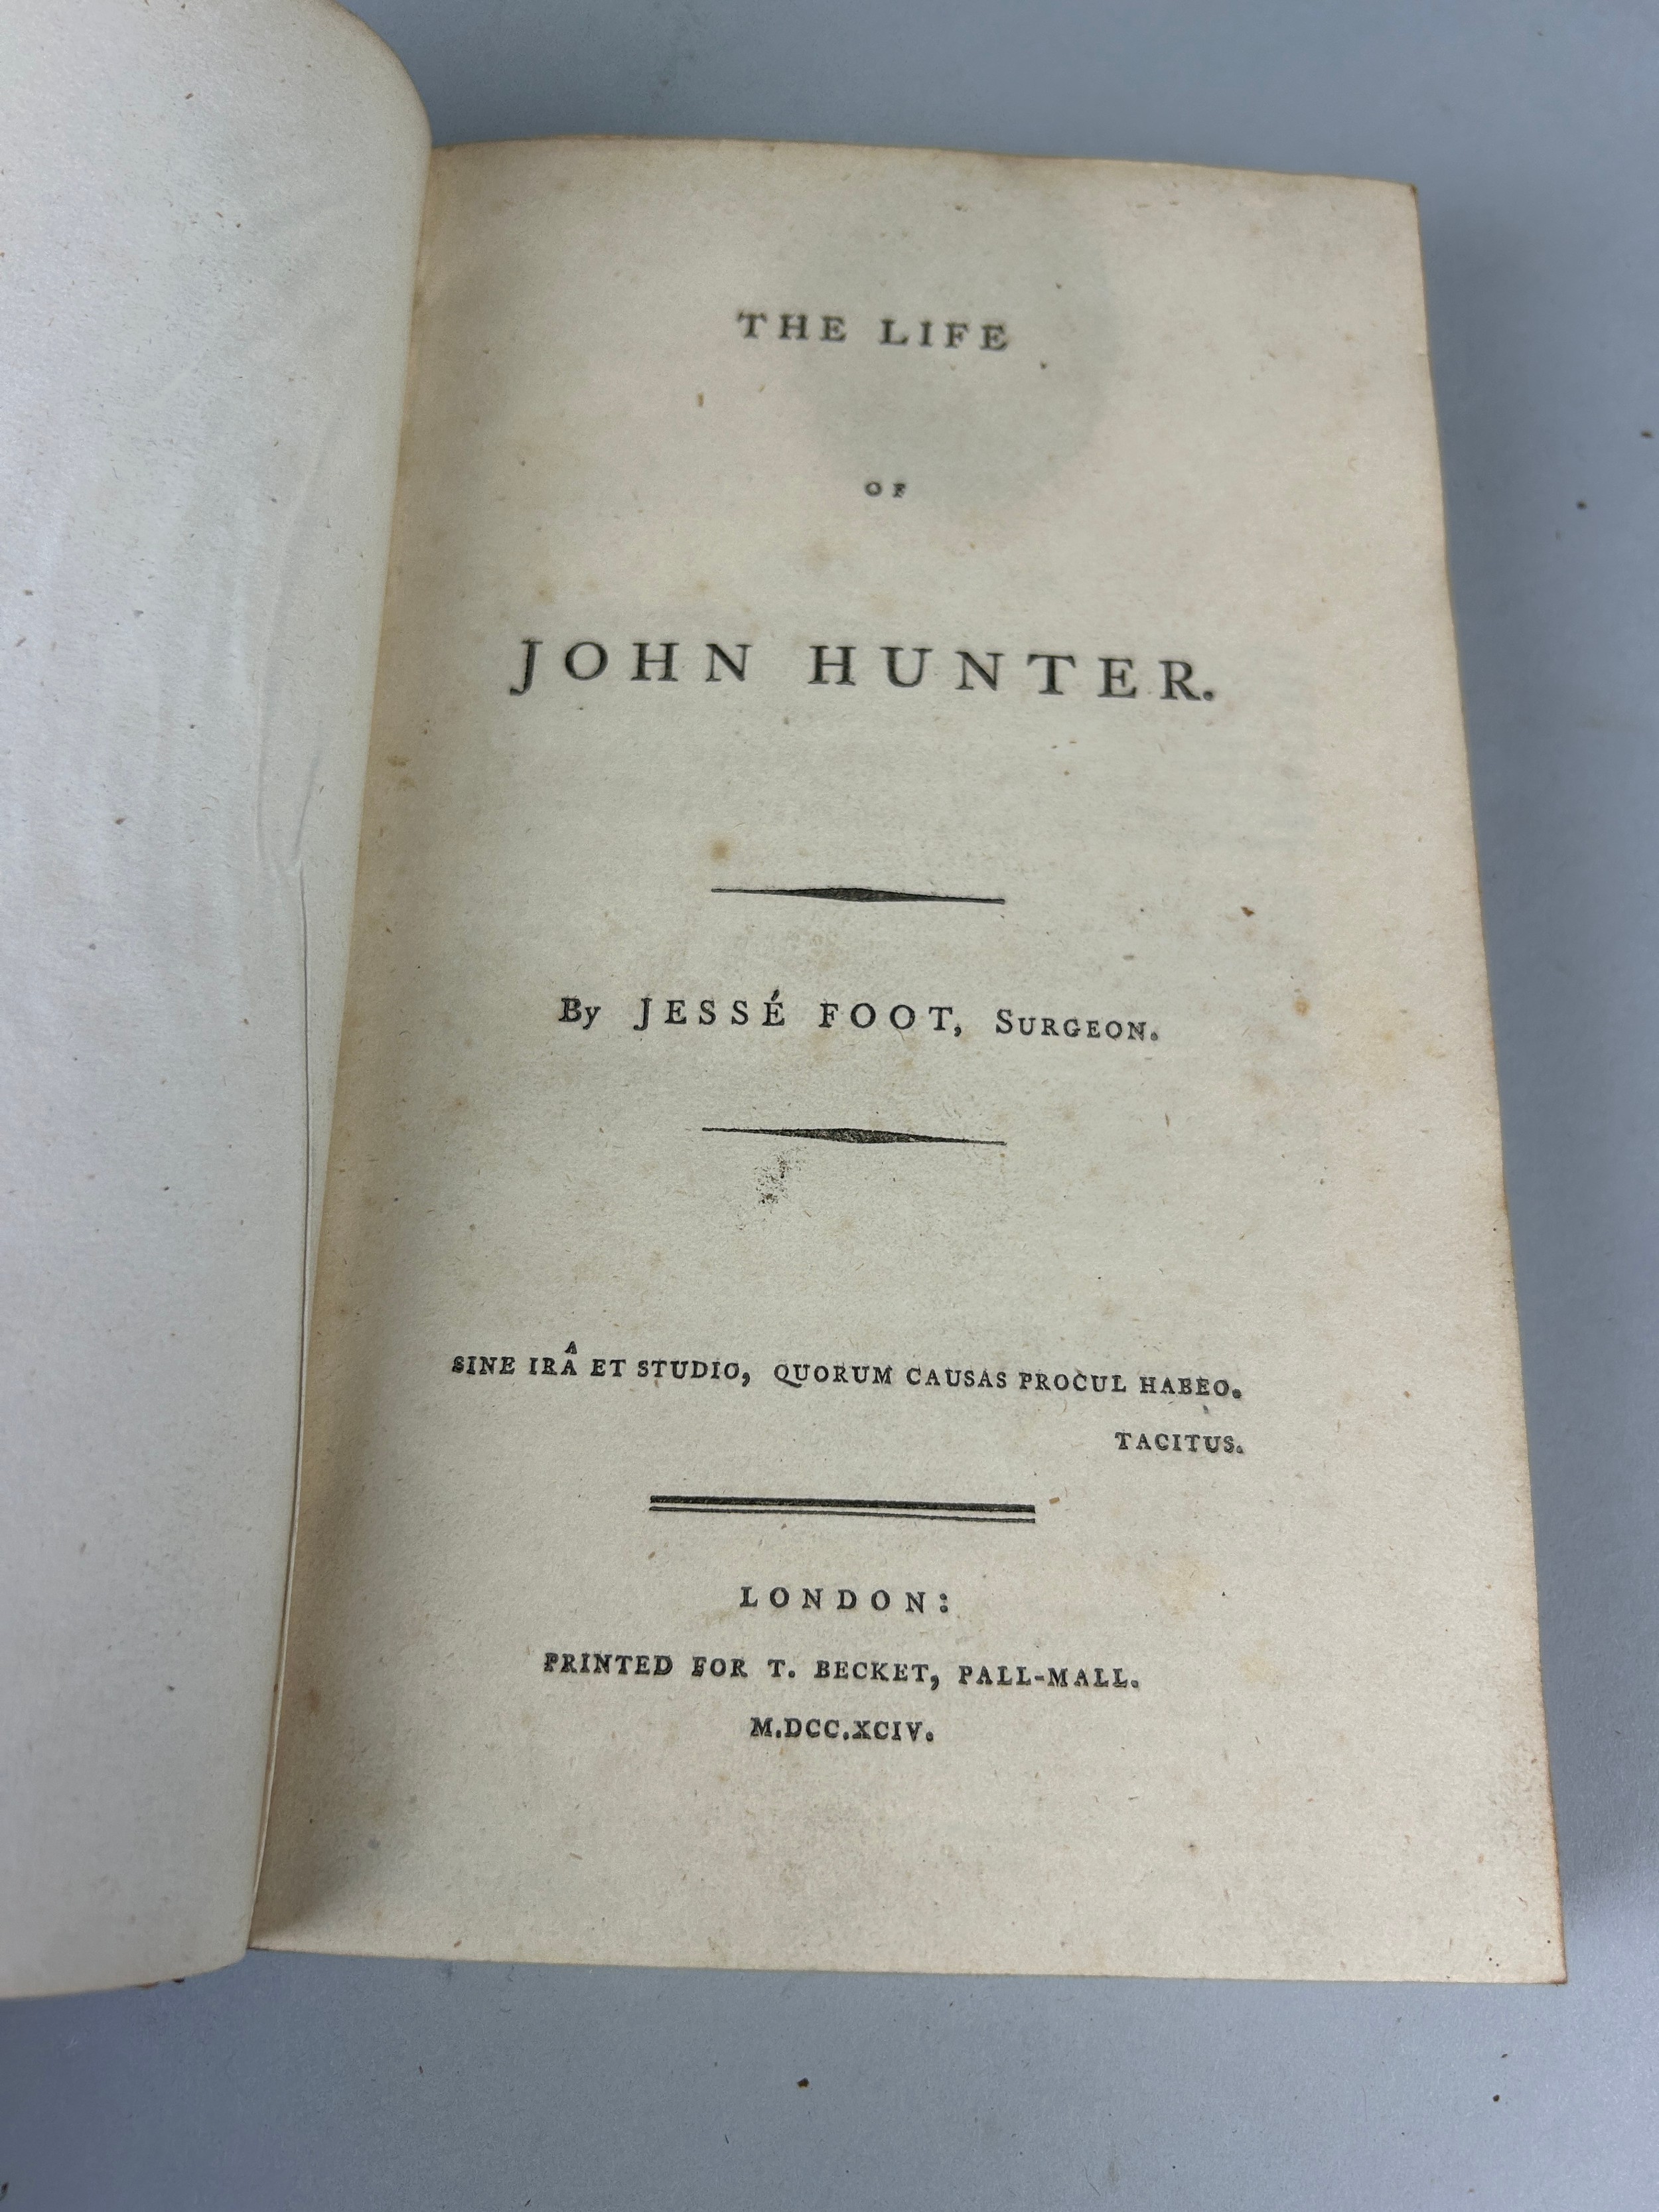 THE LIFE OF JOHN HUNTER, JESSE FOOT (SURGEON) LONDON, T.BECKET, PALL MALL, FIRST EDITION 1794, - Image 4 of 12